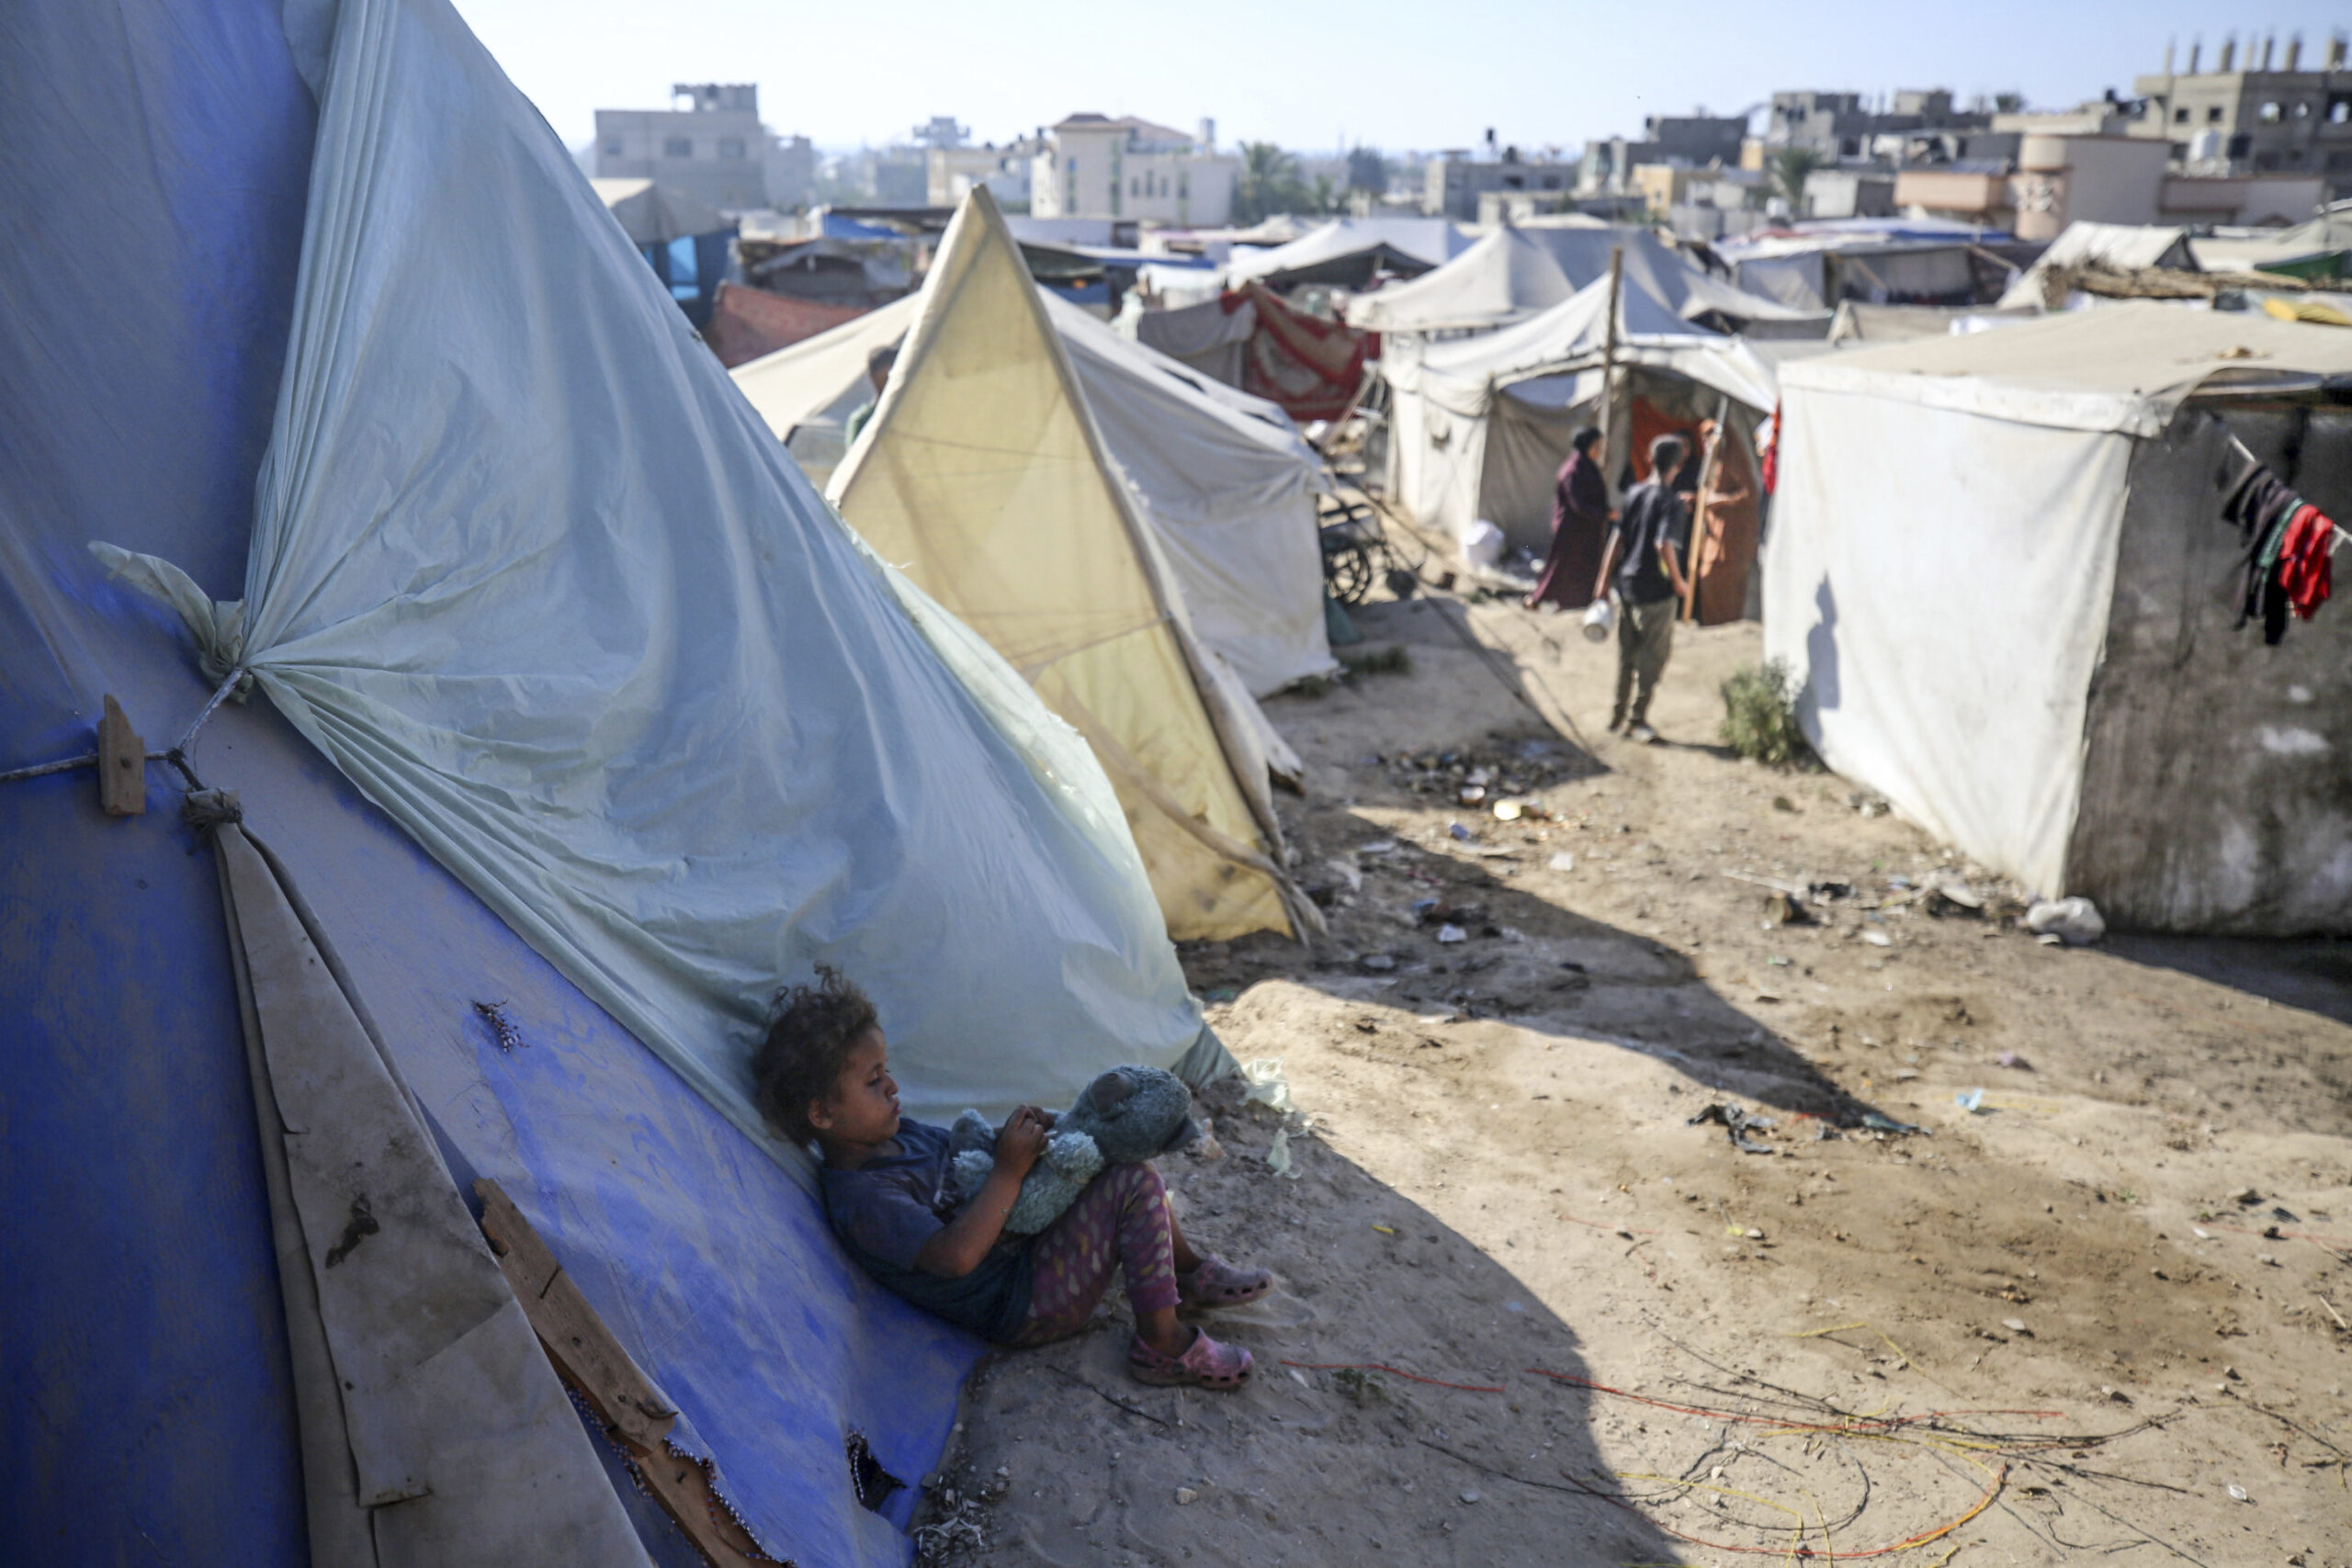 A Palestinian girl sits outside her tent in a displacement camp during a heat wave in Deir al-Balah in the Gaza Strip on June 11. The BBC Lifeline Service has been providing critical information to Gazans on military movements, humanitarian efforts, the availability of medical services, and incoming aid.